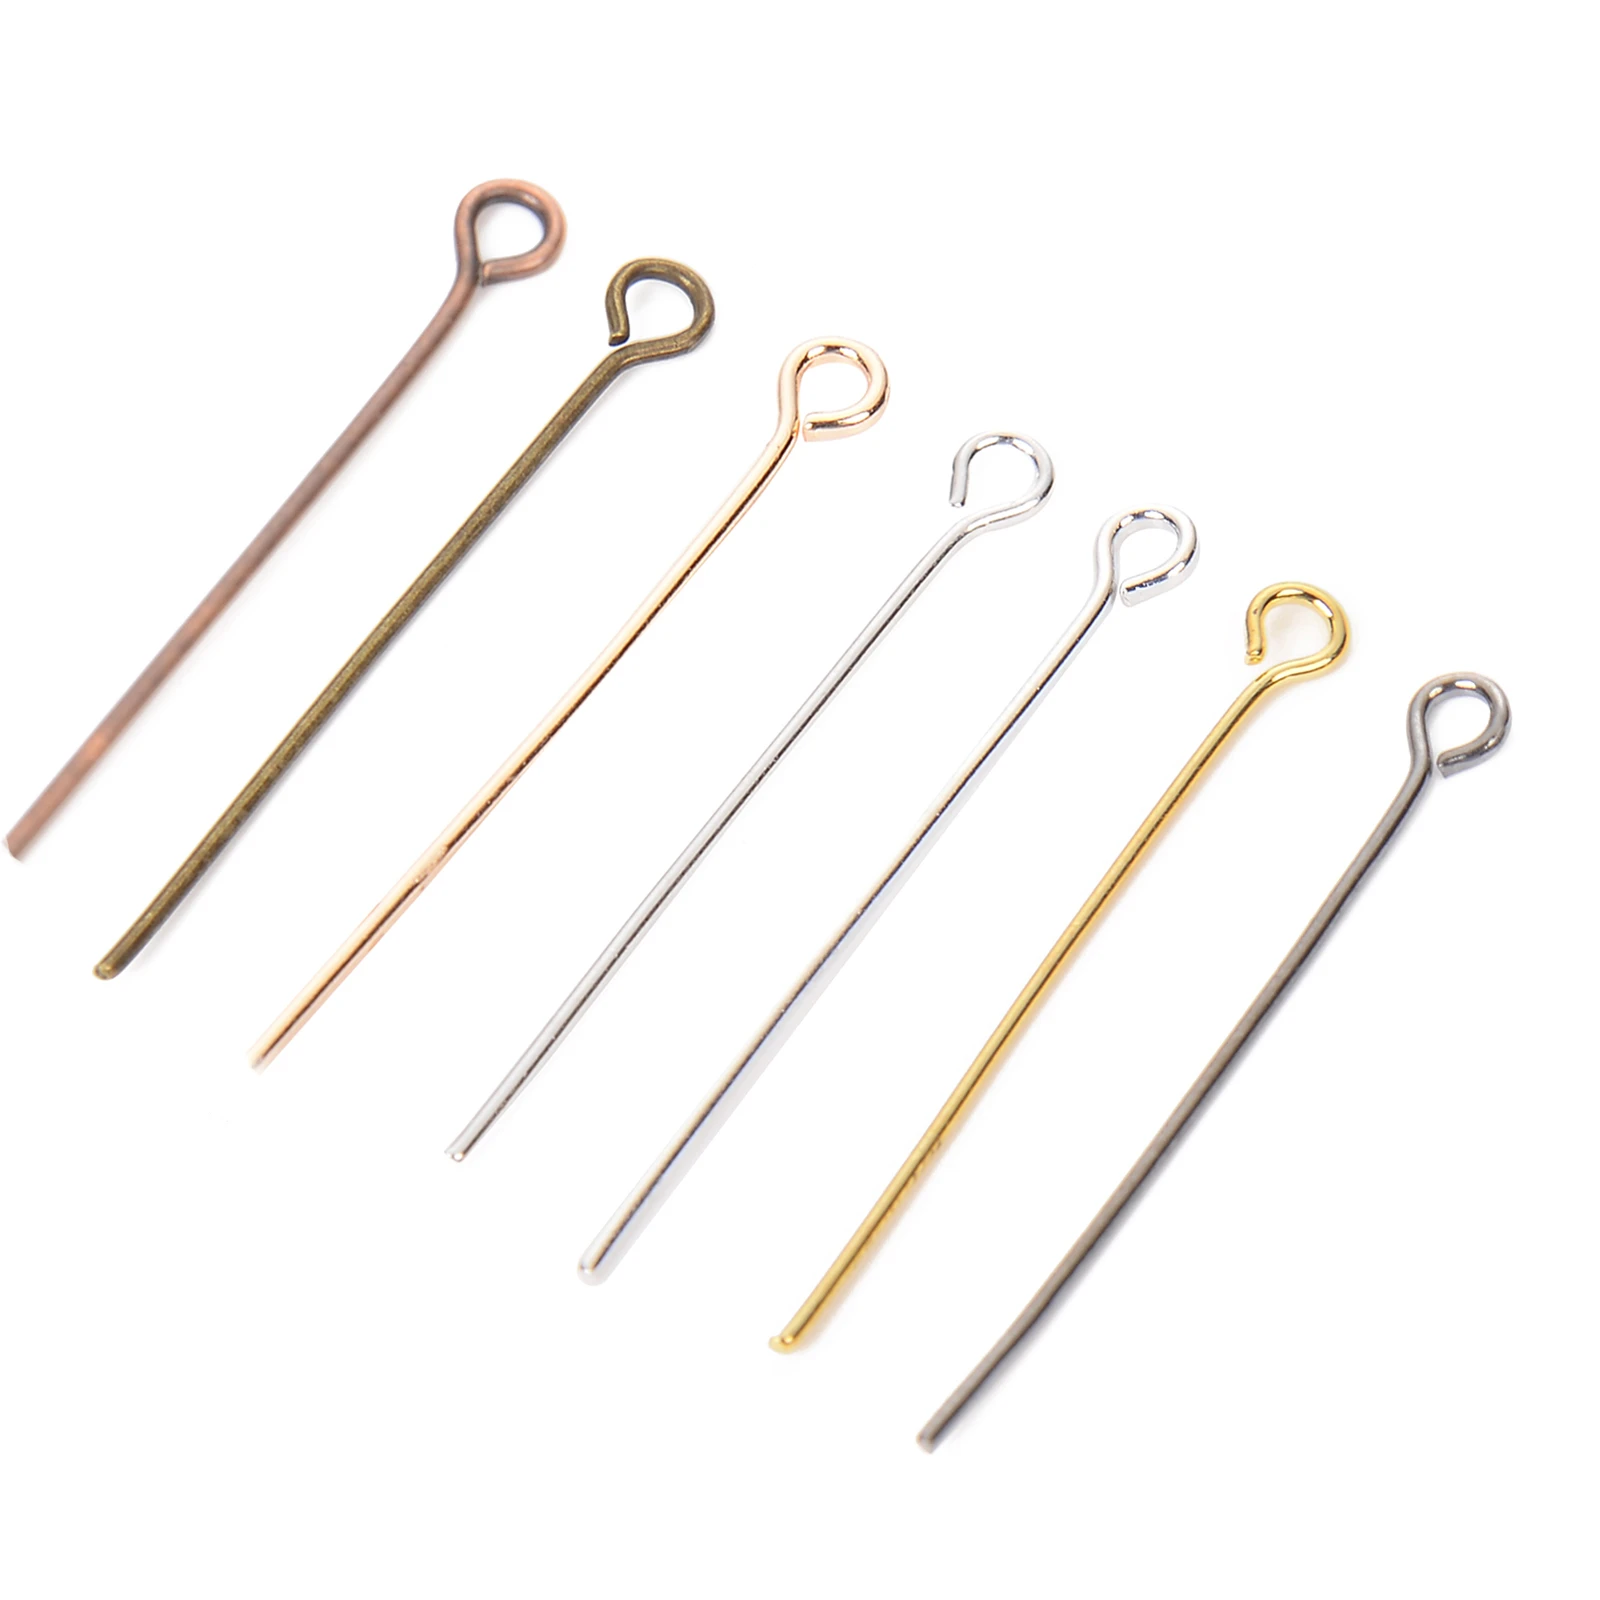 100-200Pcs Nine words needle Pins Eye Pin Jewelry Findings For Necklace Charm Jewelry Making Earrings DIY Accessories